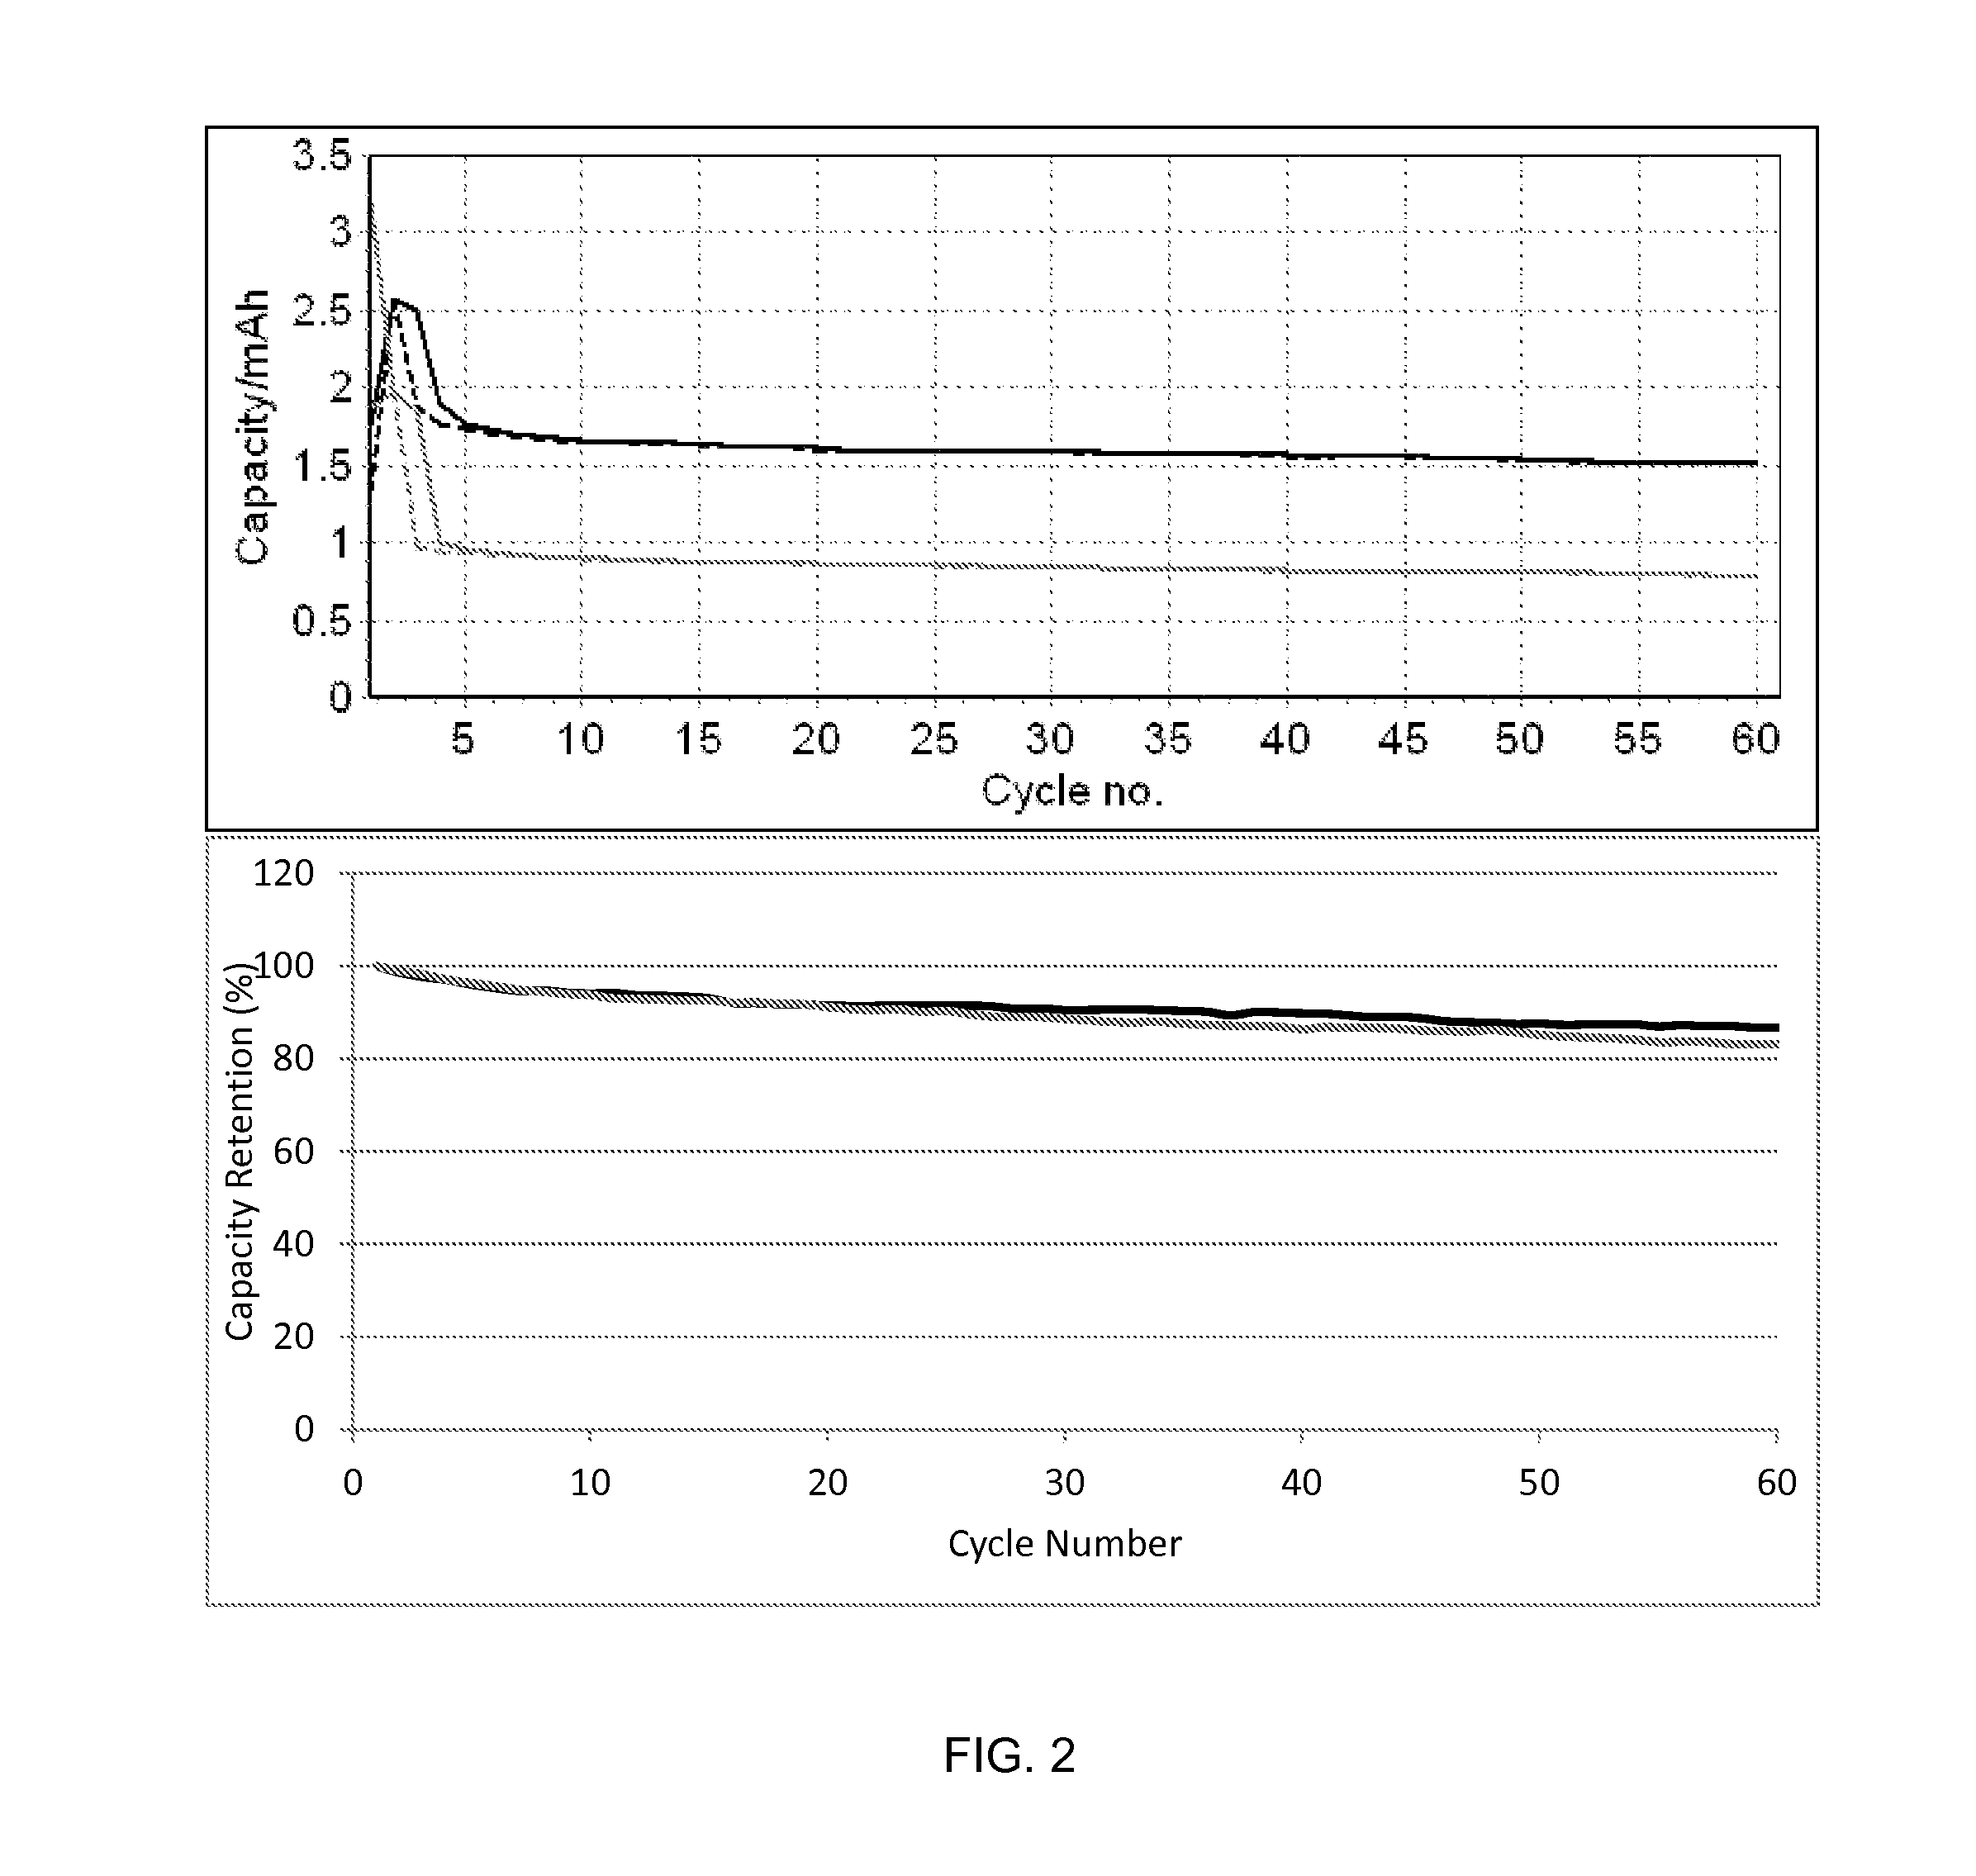 Phased introduction of lithium into the pre-lithiated anode of a lithium ion electrochemical cell